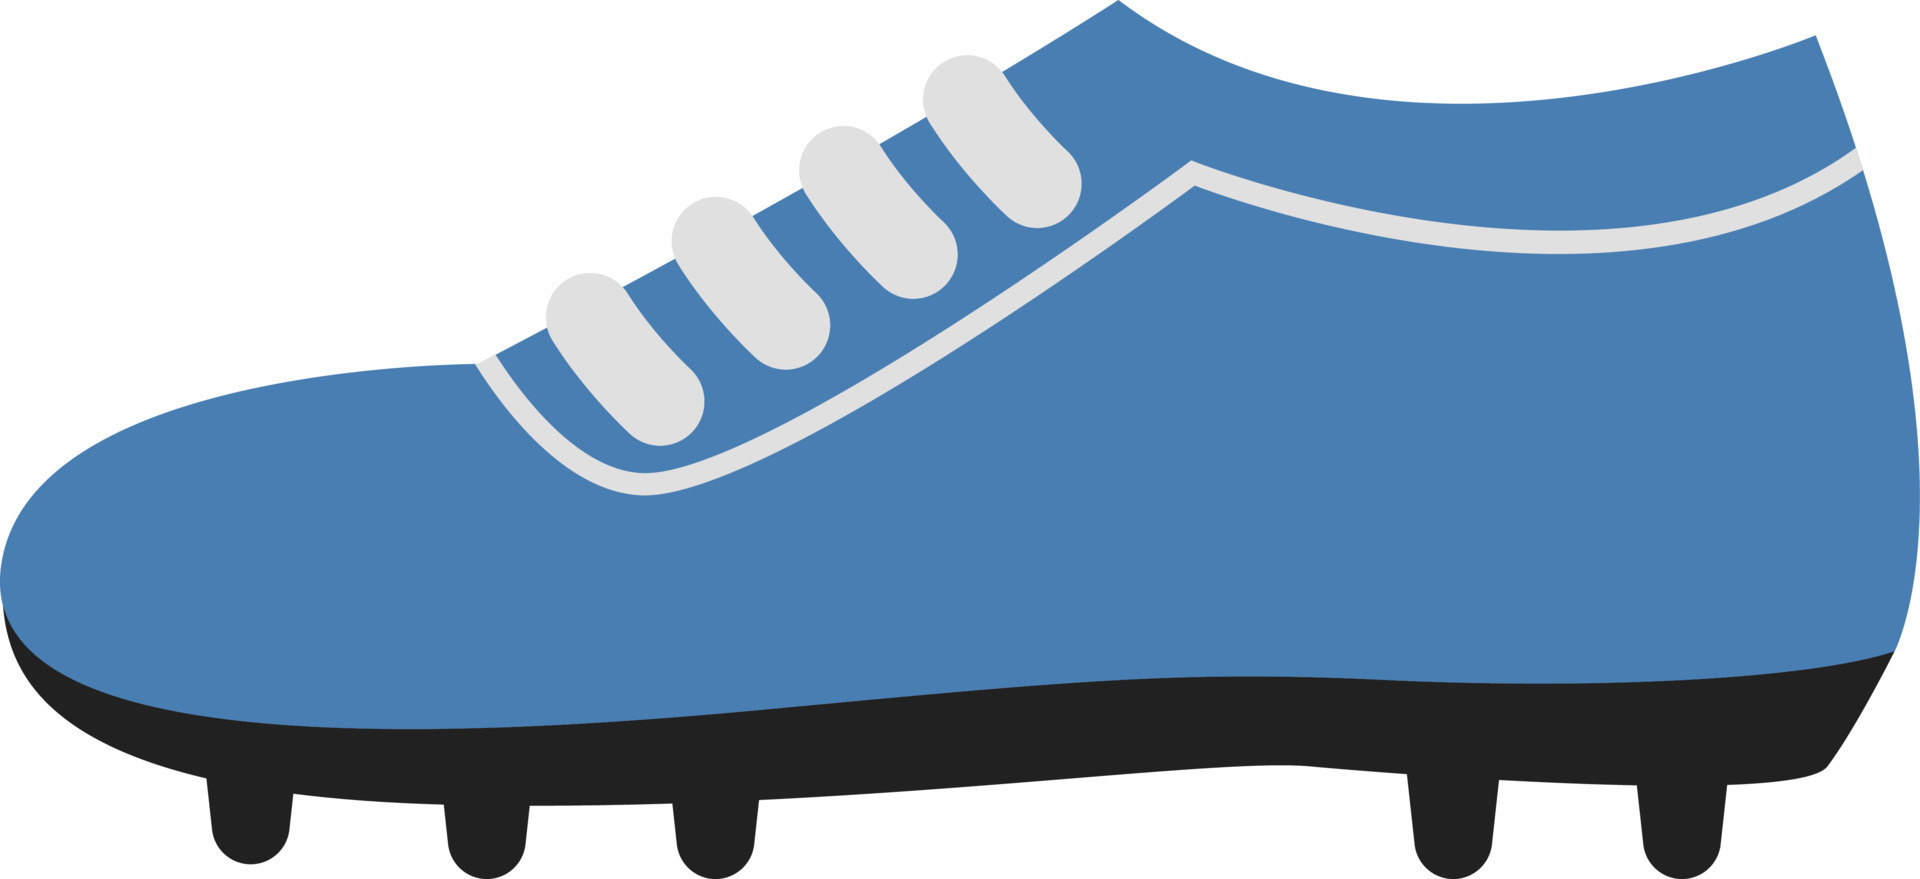 Football boots, illustration, vector on white background. 13509759 ...